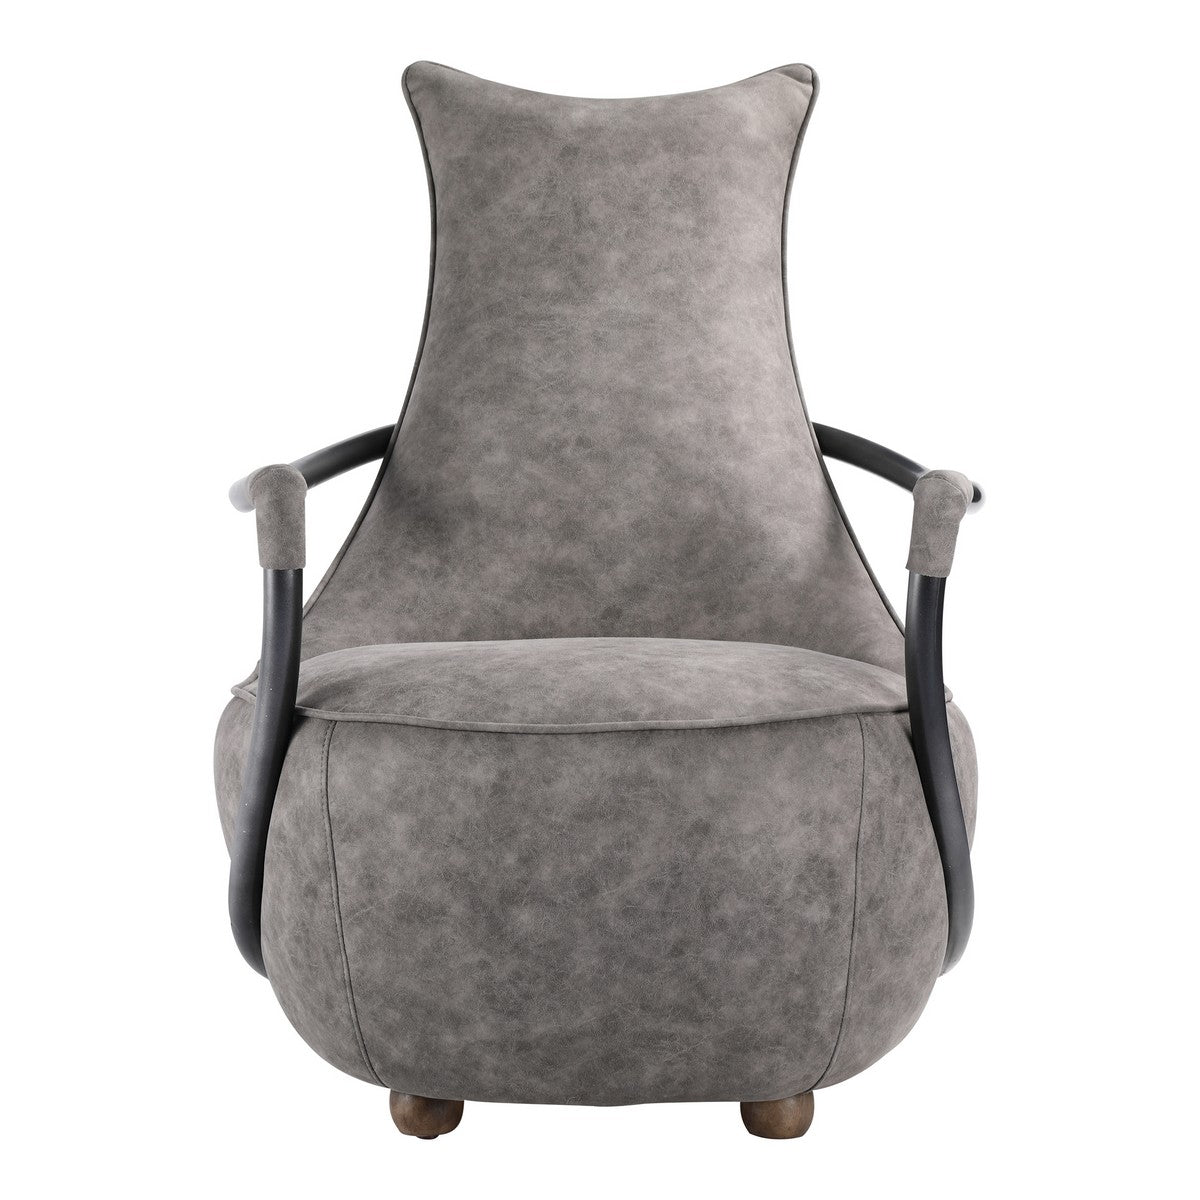 Moe's Home Collection Carlisle Club Chair Grey Velvet - PK-1026-15 - Moe's Home Collection - lounge chairs - Minimal And Modern - 1